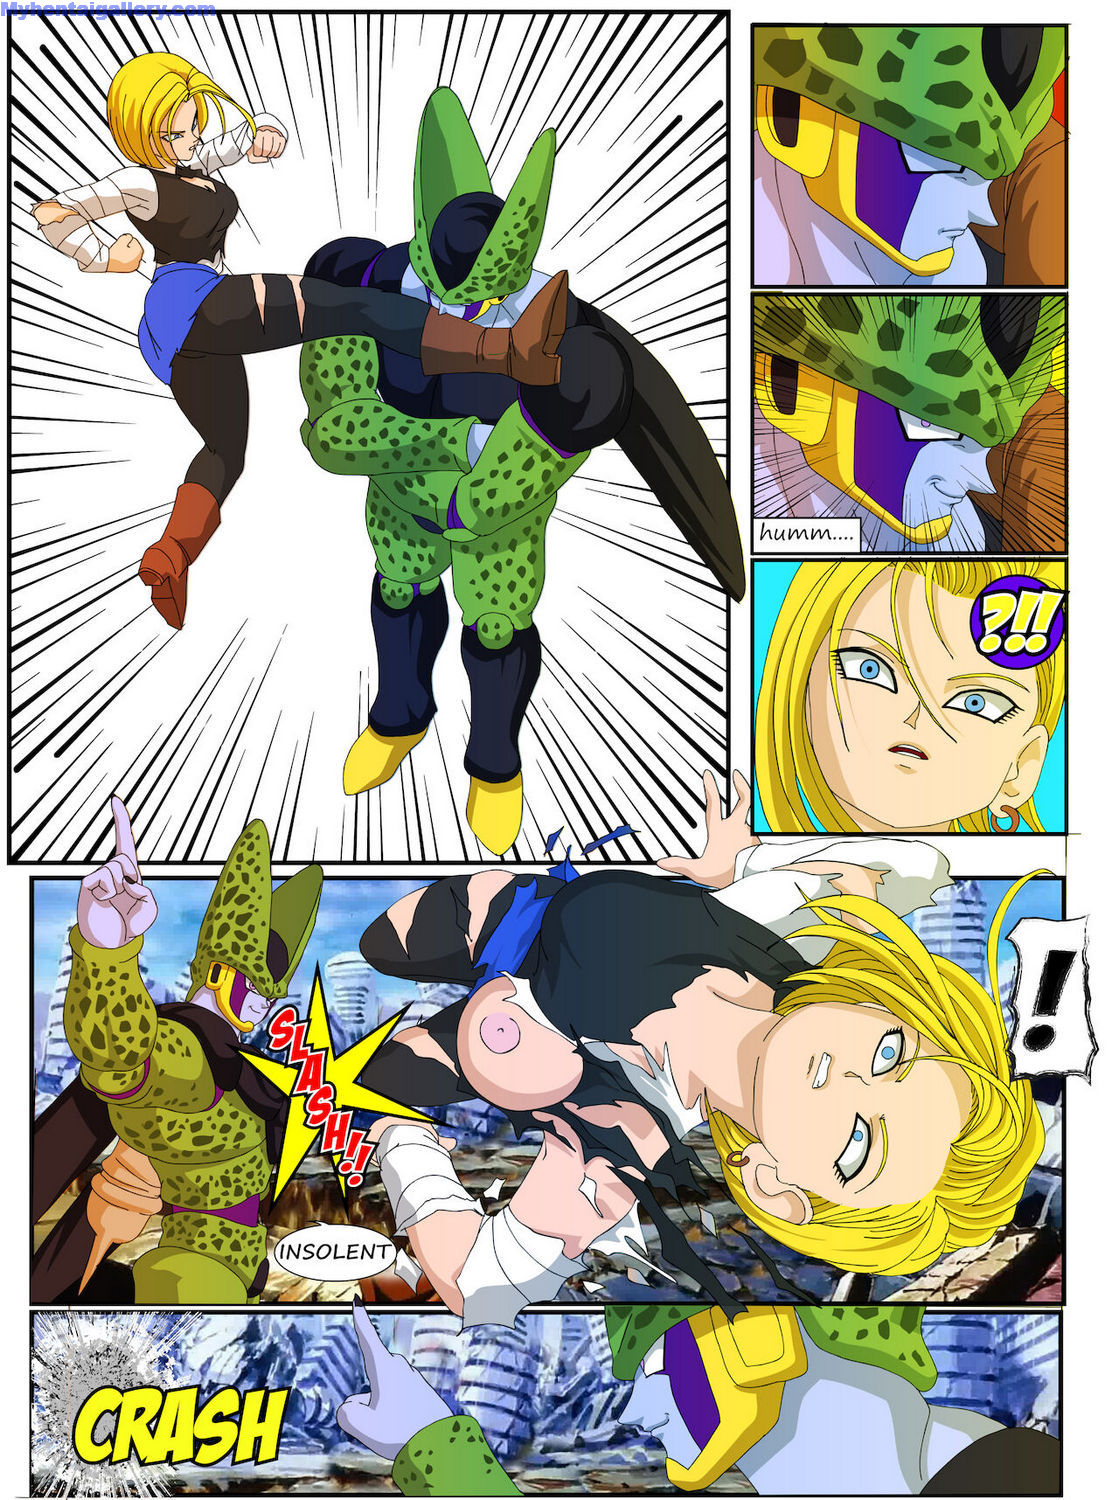 18 And Cell Hentai - Android 18 vs Cell HD Hentai Porn Comic - 002